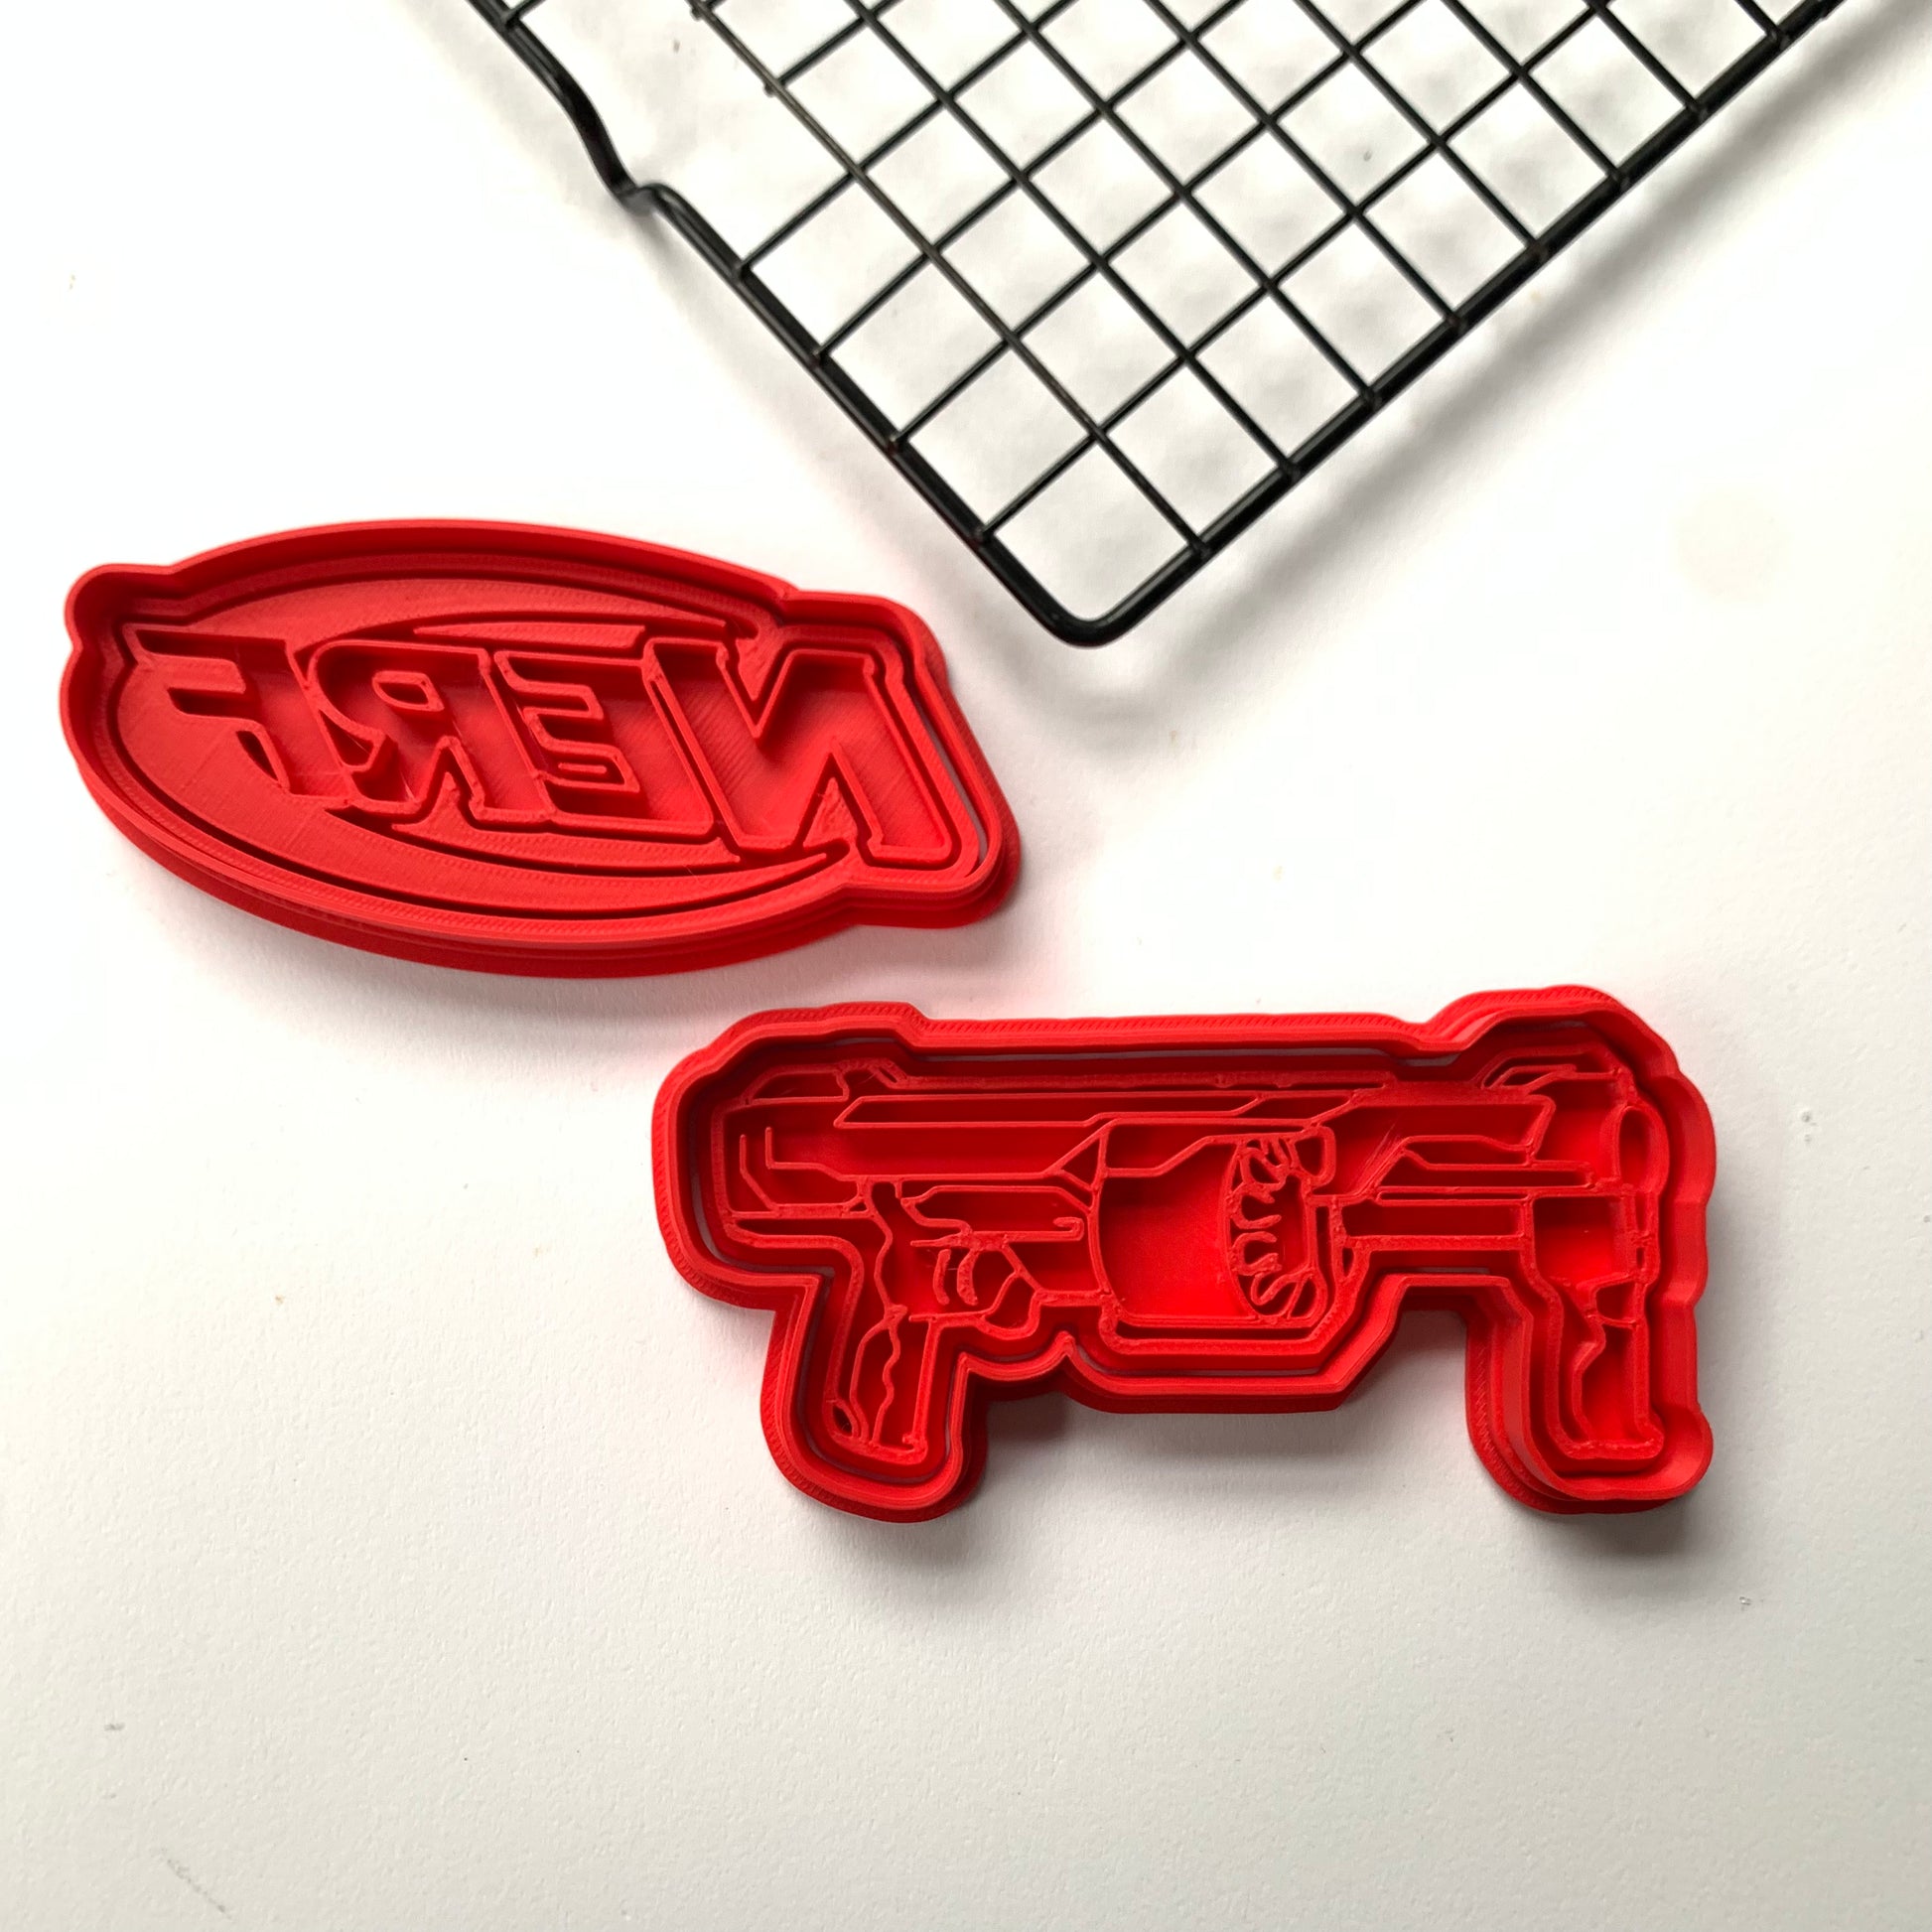 Nerf cookie cutter and stamp MEG cookie cutters